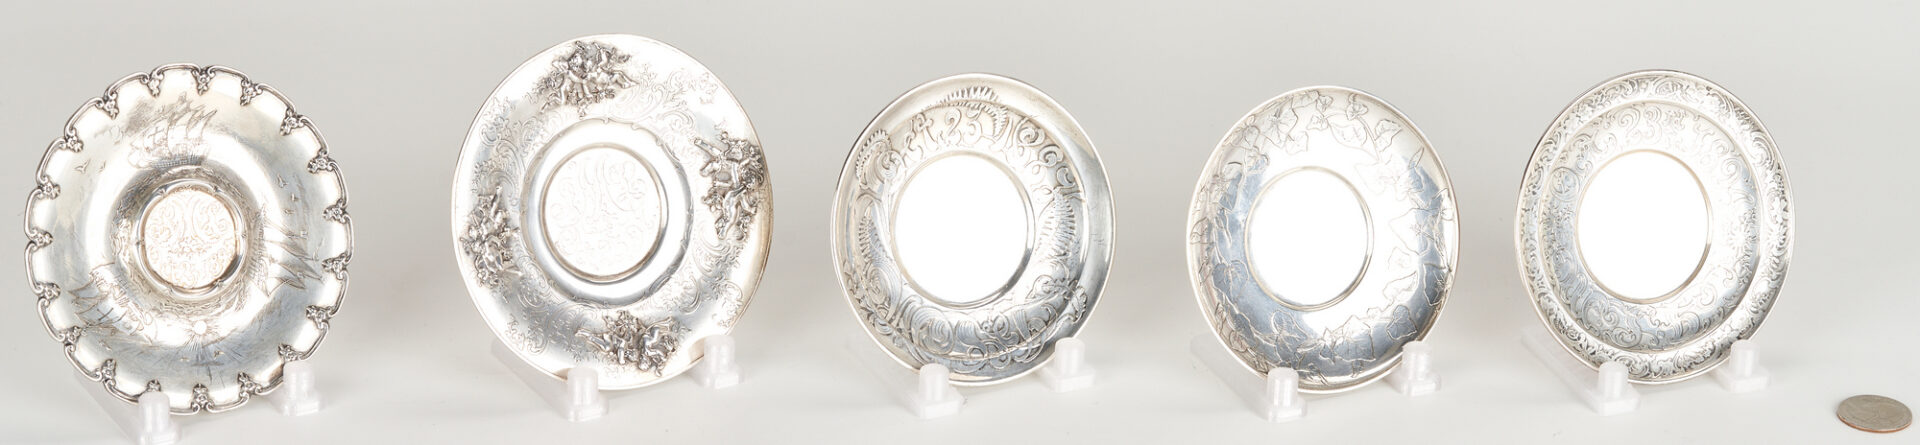 Lot 1201: 5 Tiffany Sterling Oct. 23 Commemorative Saucers